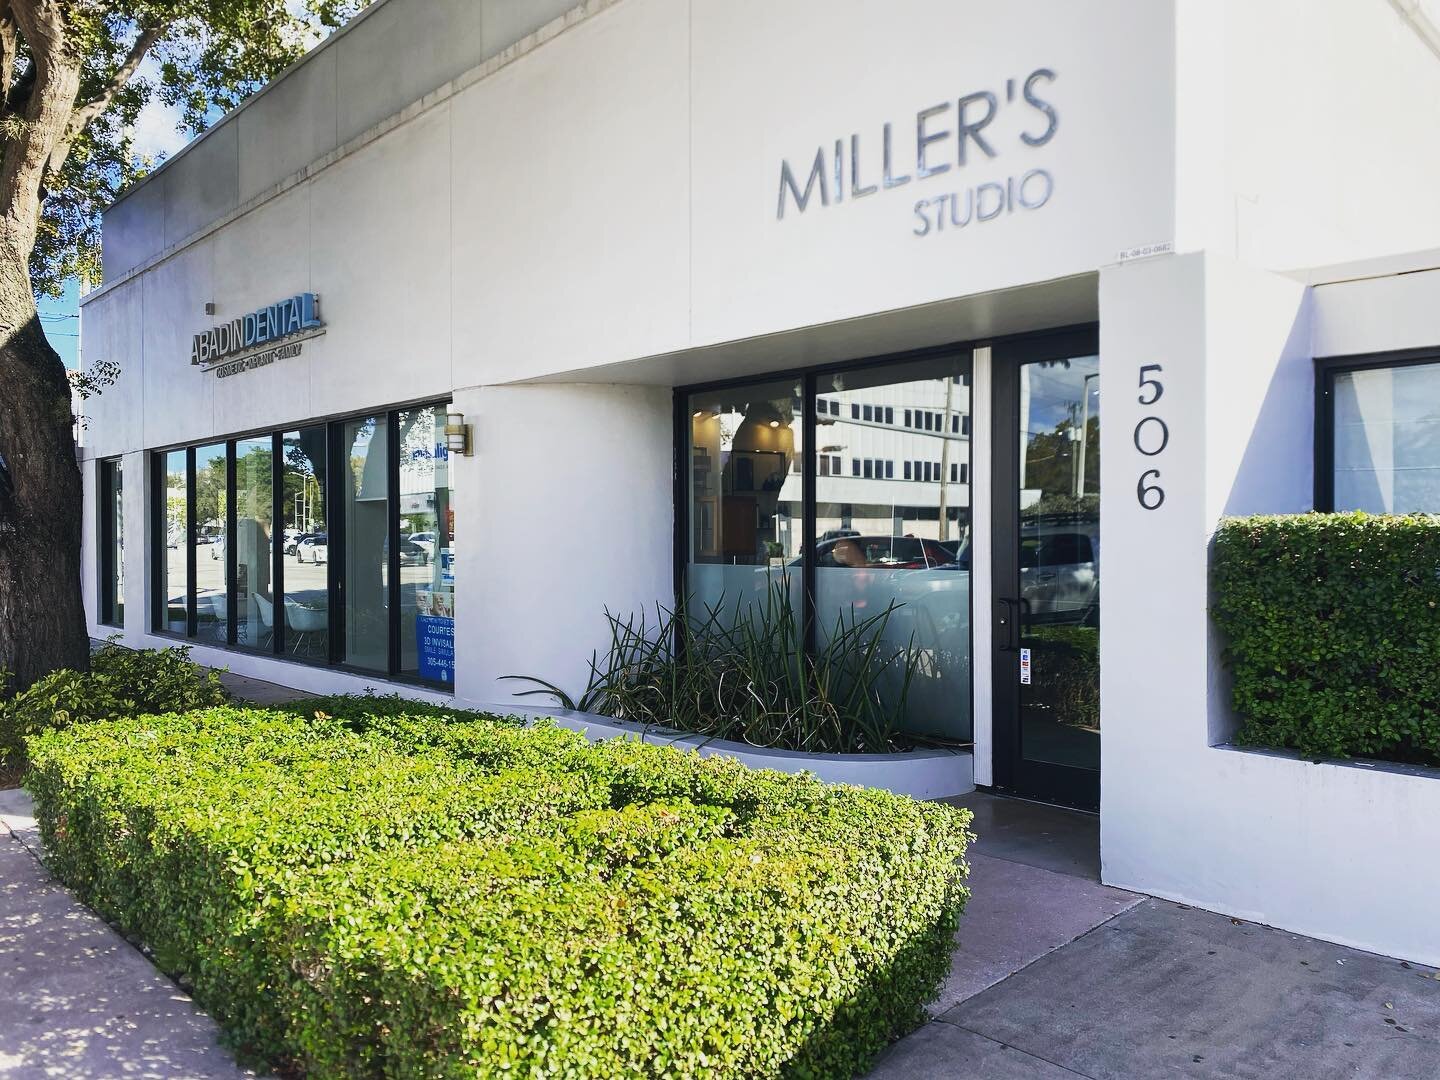 Your favorite products are now available at Miller&rsquo; Studio.
Welcome to family Miller&rsquo;s team ❤️❤️❤️